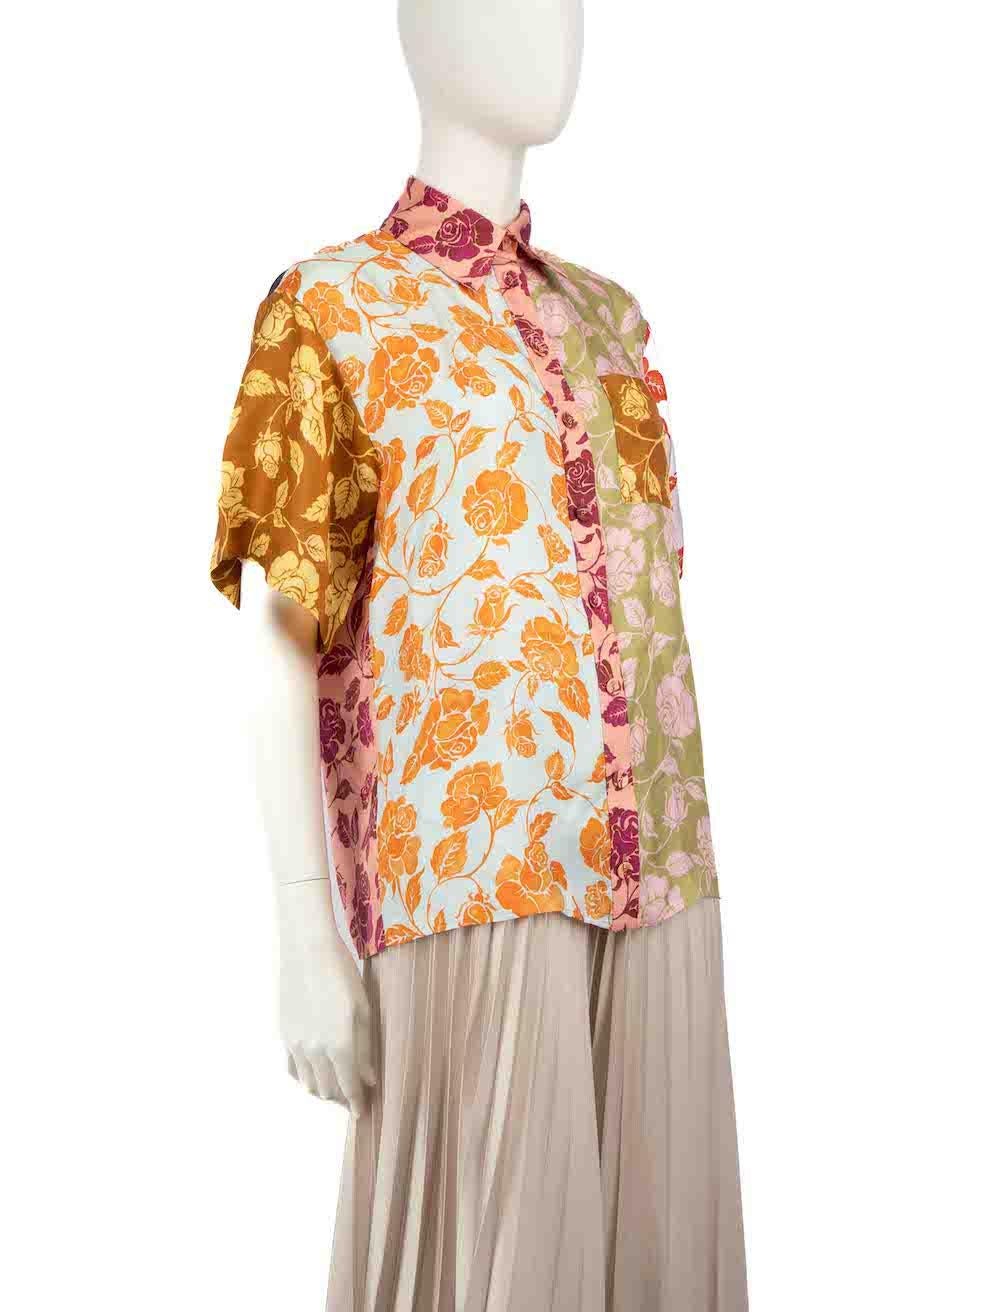 CONDITION is Good. Minor wear to shirt is evident. Light pull thread to weave right sleeve on this used Zimmermann designer resale item.
 
 
 
 Details
 
 
 Multicolour- pink tone
 
 Silk
 
 Shirt
 
 Floral pattern
 
 Short sleeves
 
 Button up